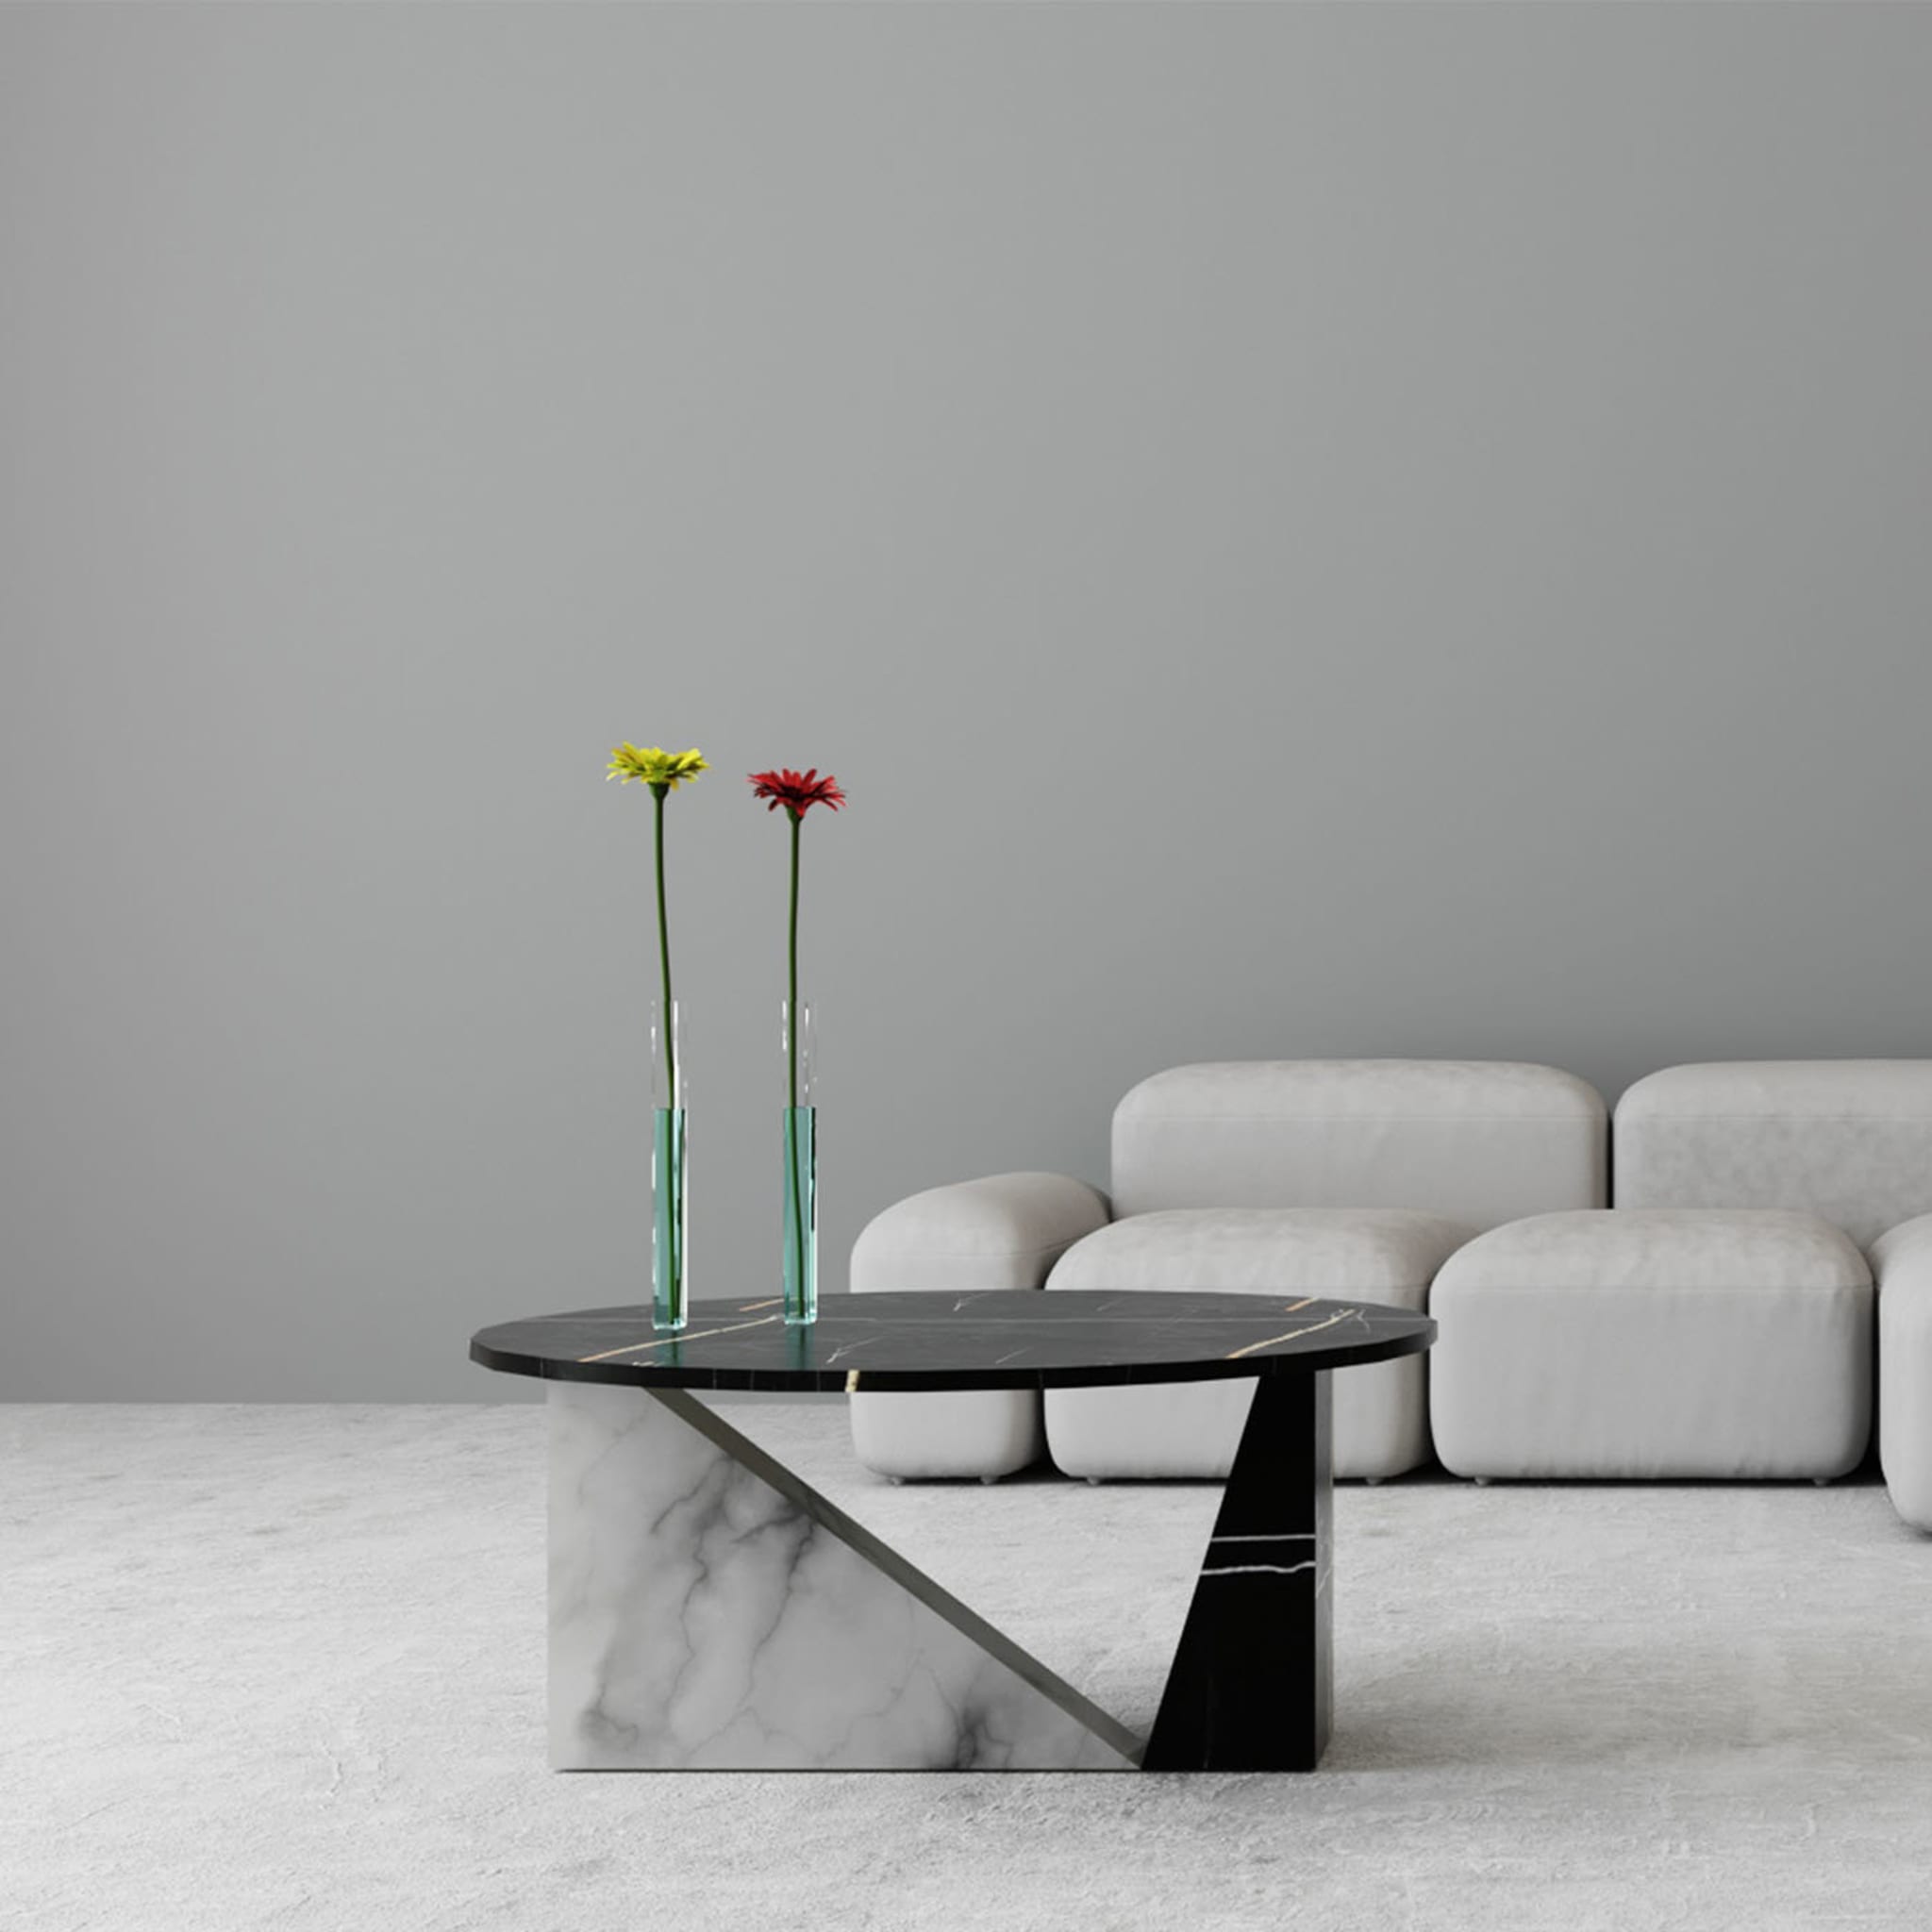 Dieus Table in White Carrara and Sahara Noir Marbles by sid&sign - Alternative view 2